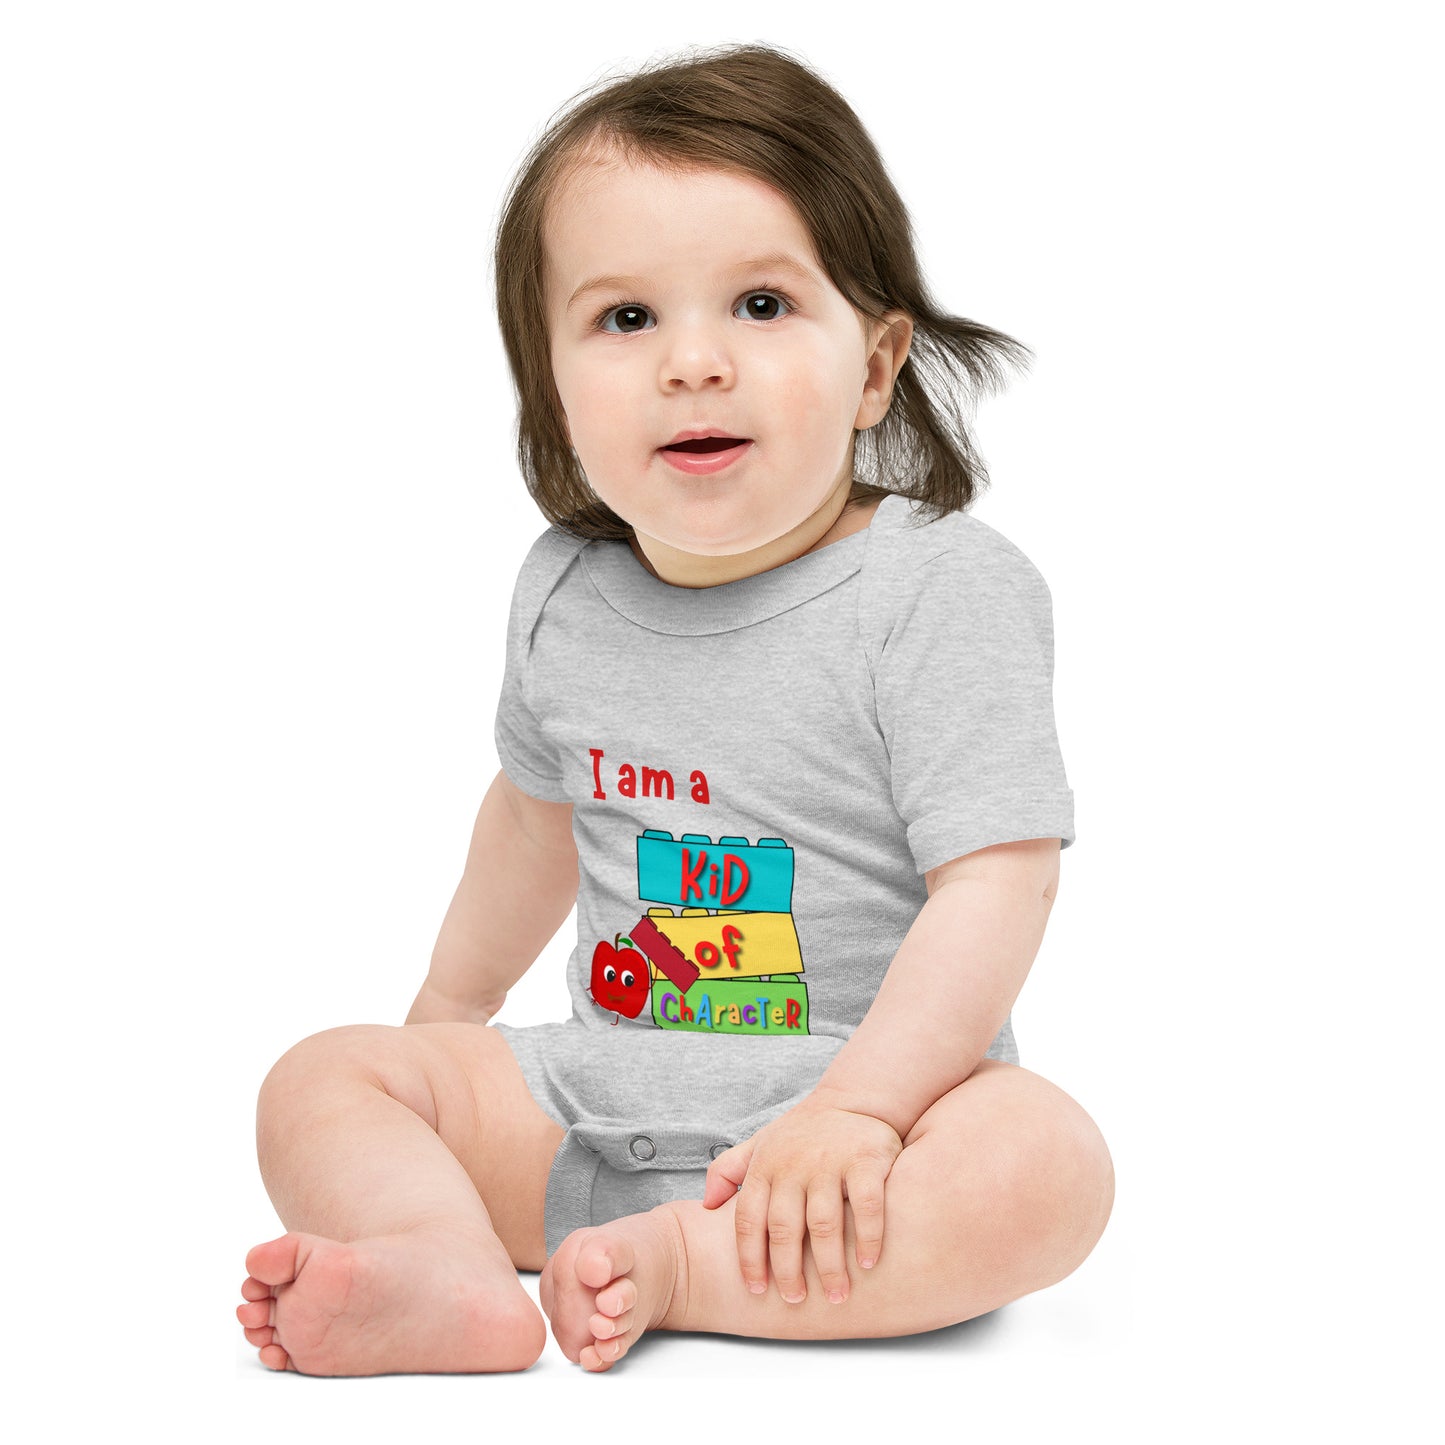 KOC Baby I Am A Kid of Character - Baby short sleeve one piece